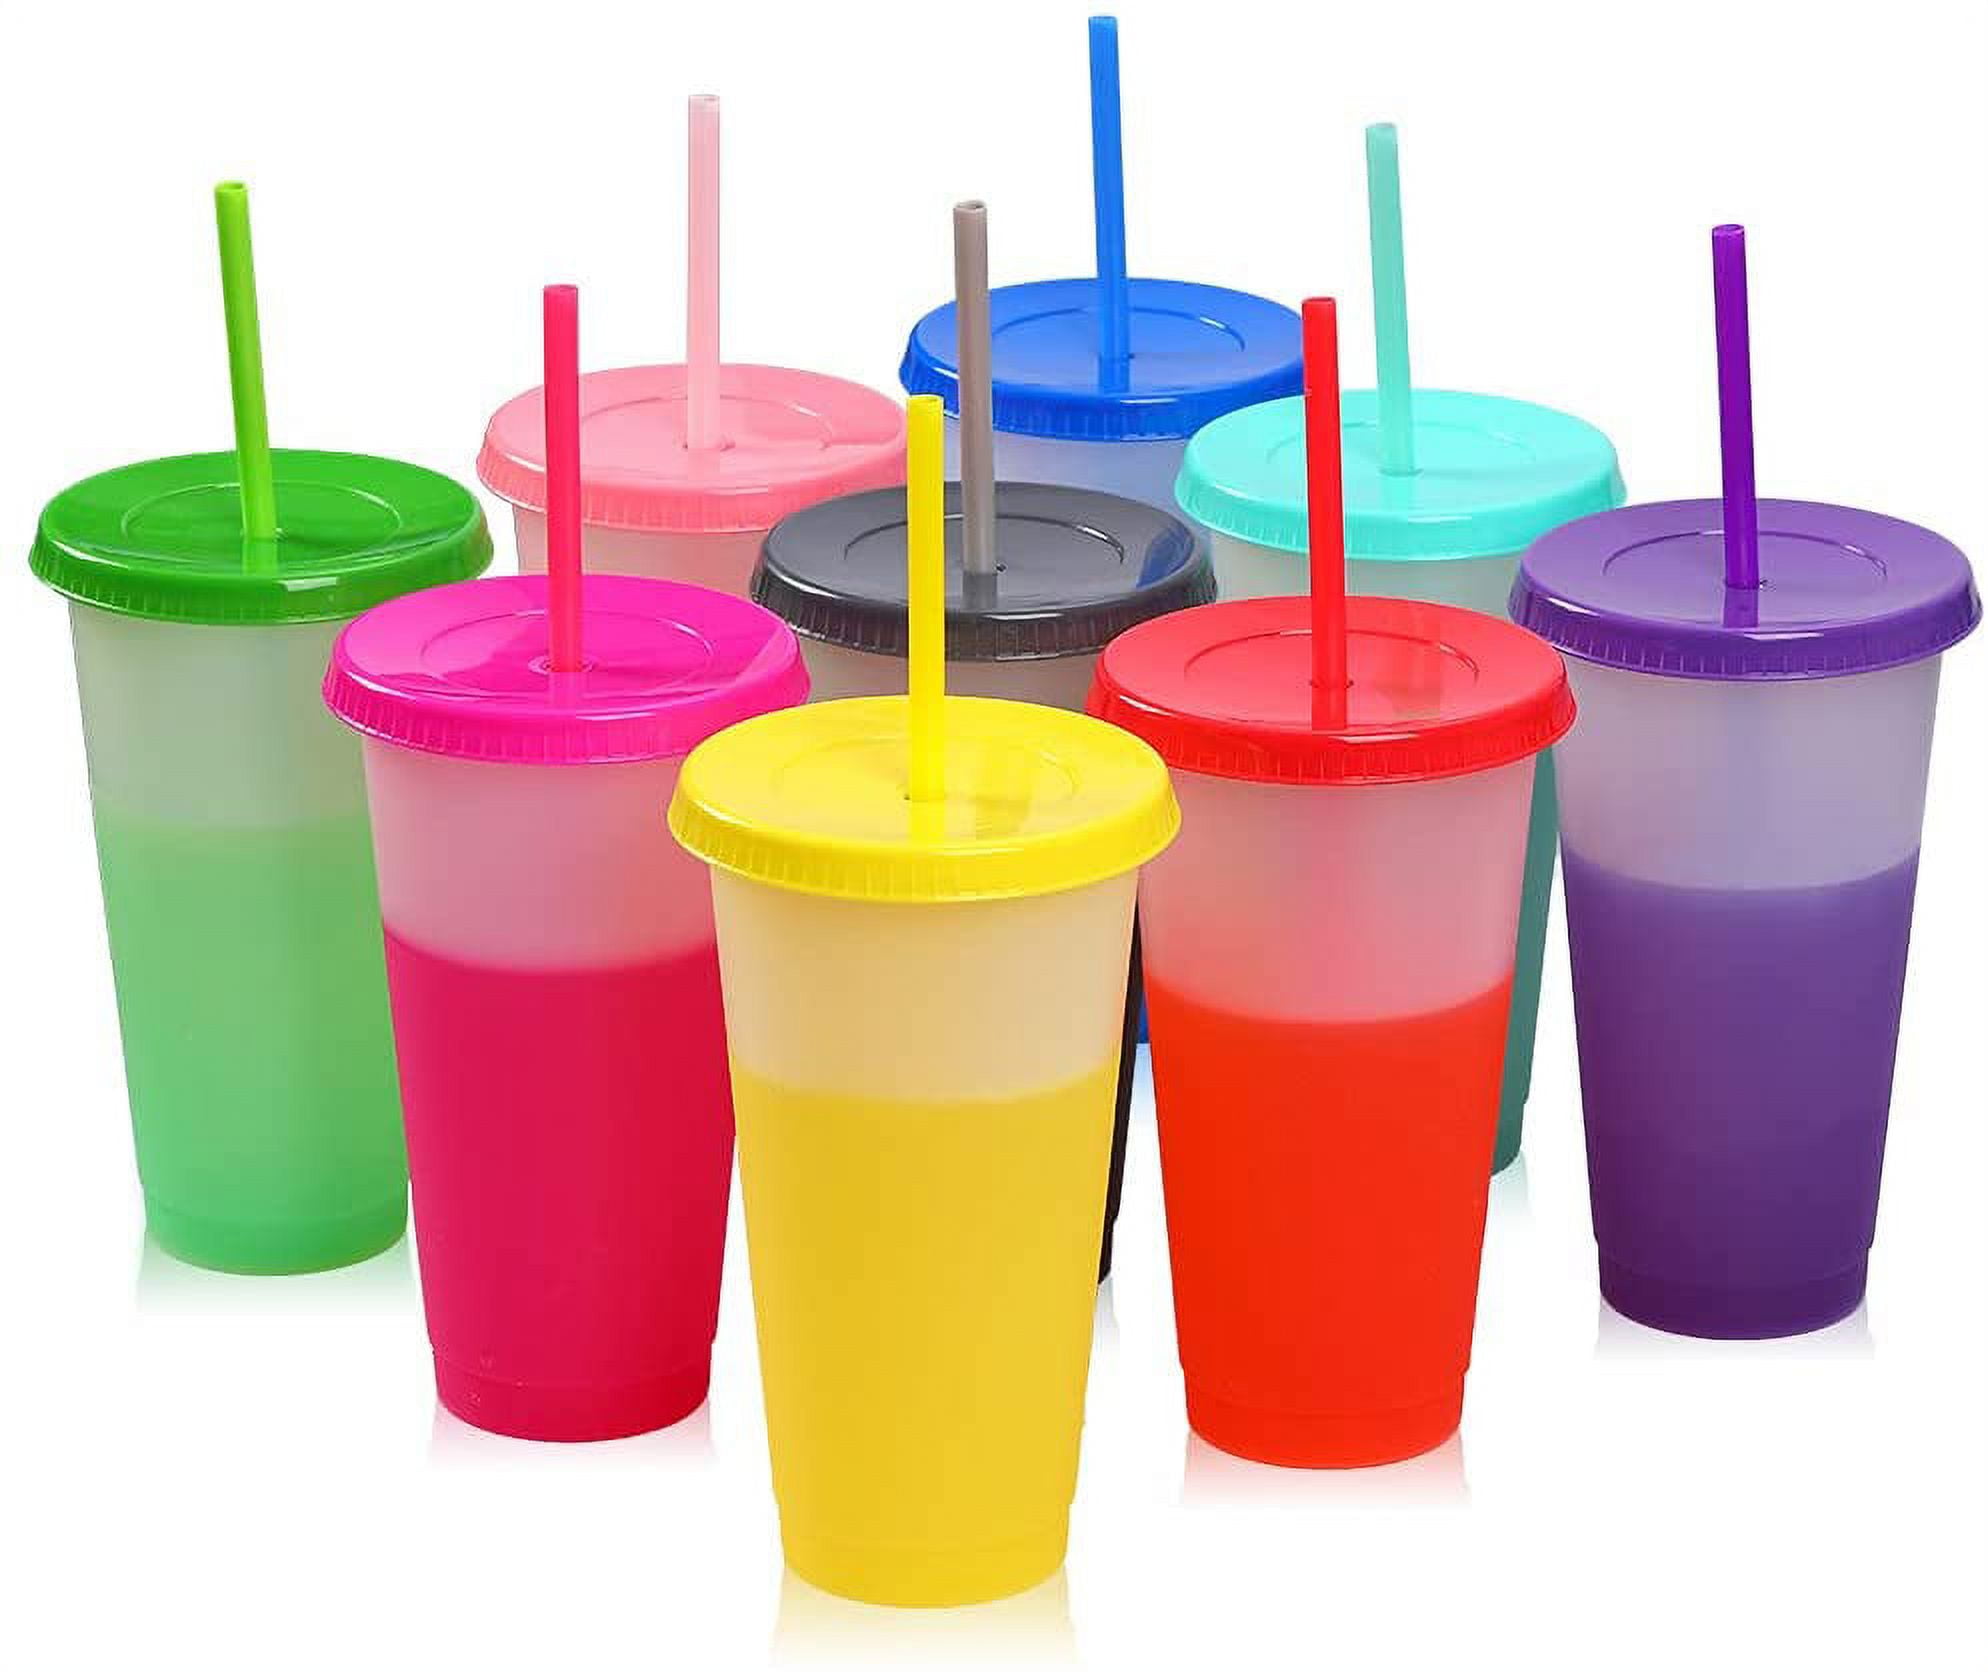 LEIFEOSH Plastic Tumblers with Lids and Straws, 36 Pcs Reusable Cups with  Lids Plastic Colorful Cups…See more LEIFEOSH Plastic Tumblers with Lids and